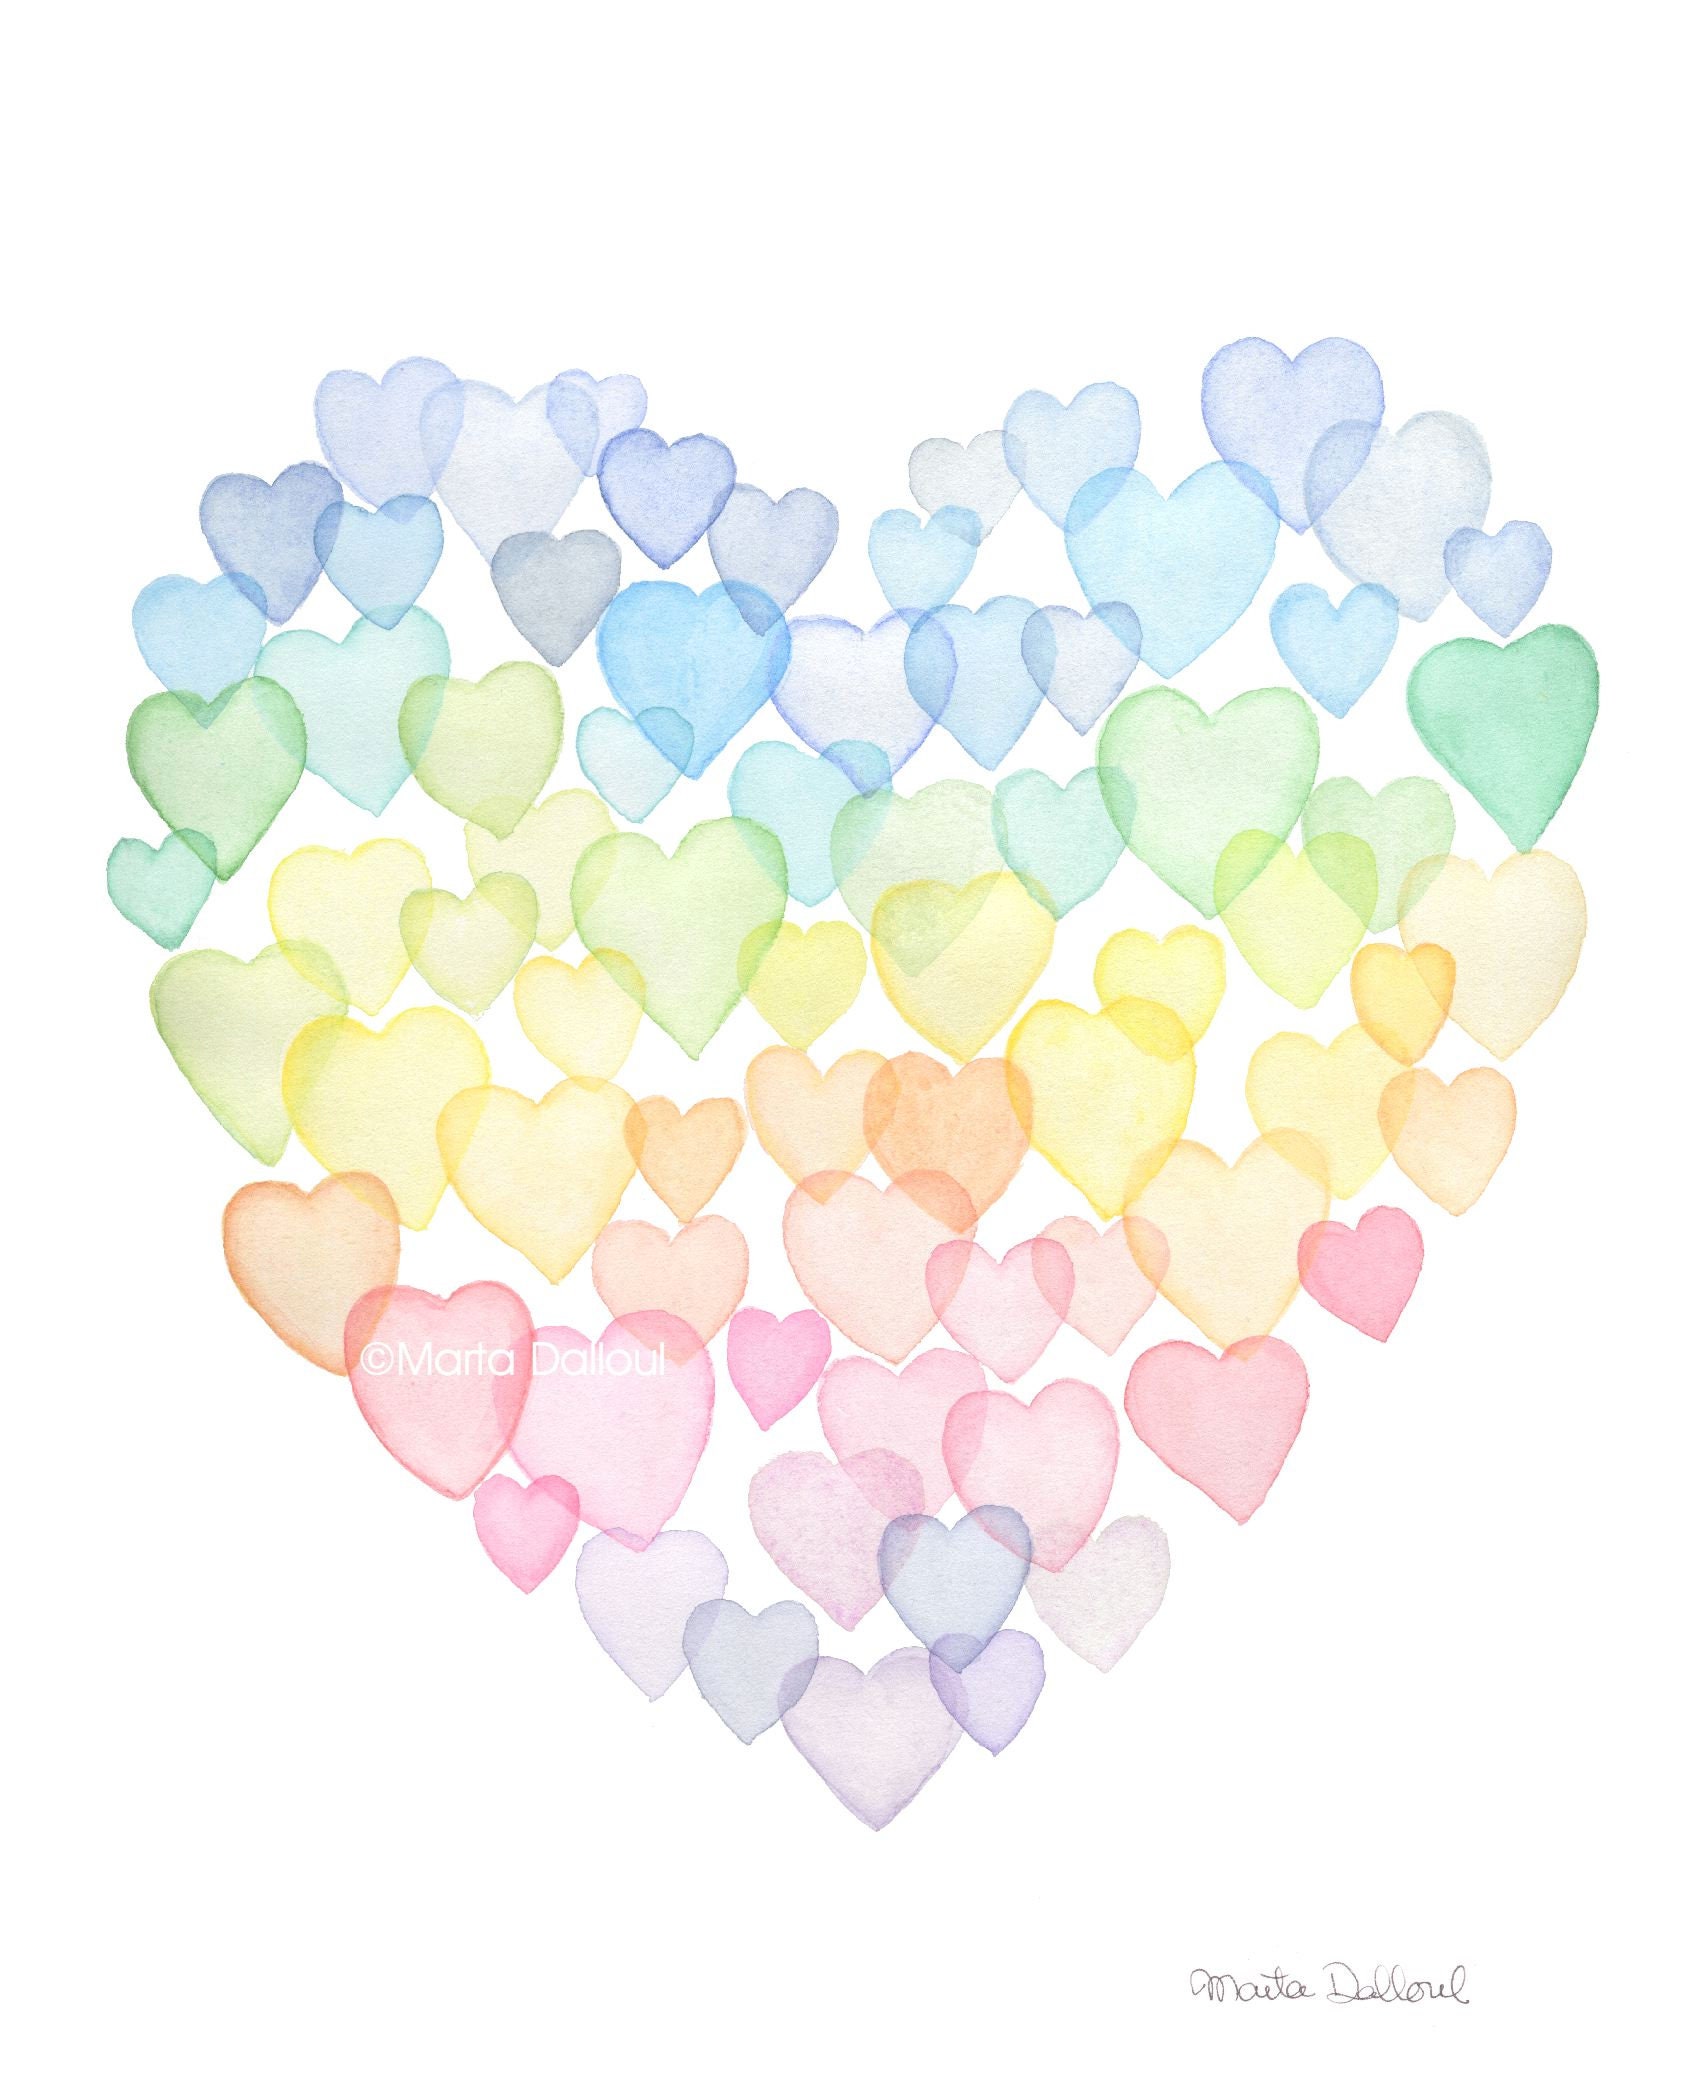 Matheu Rainbow Watercolor Heart by - Wrapped Canvas Painting Ebern Designs Size: 12 H x 12 W x 1.25 D